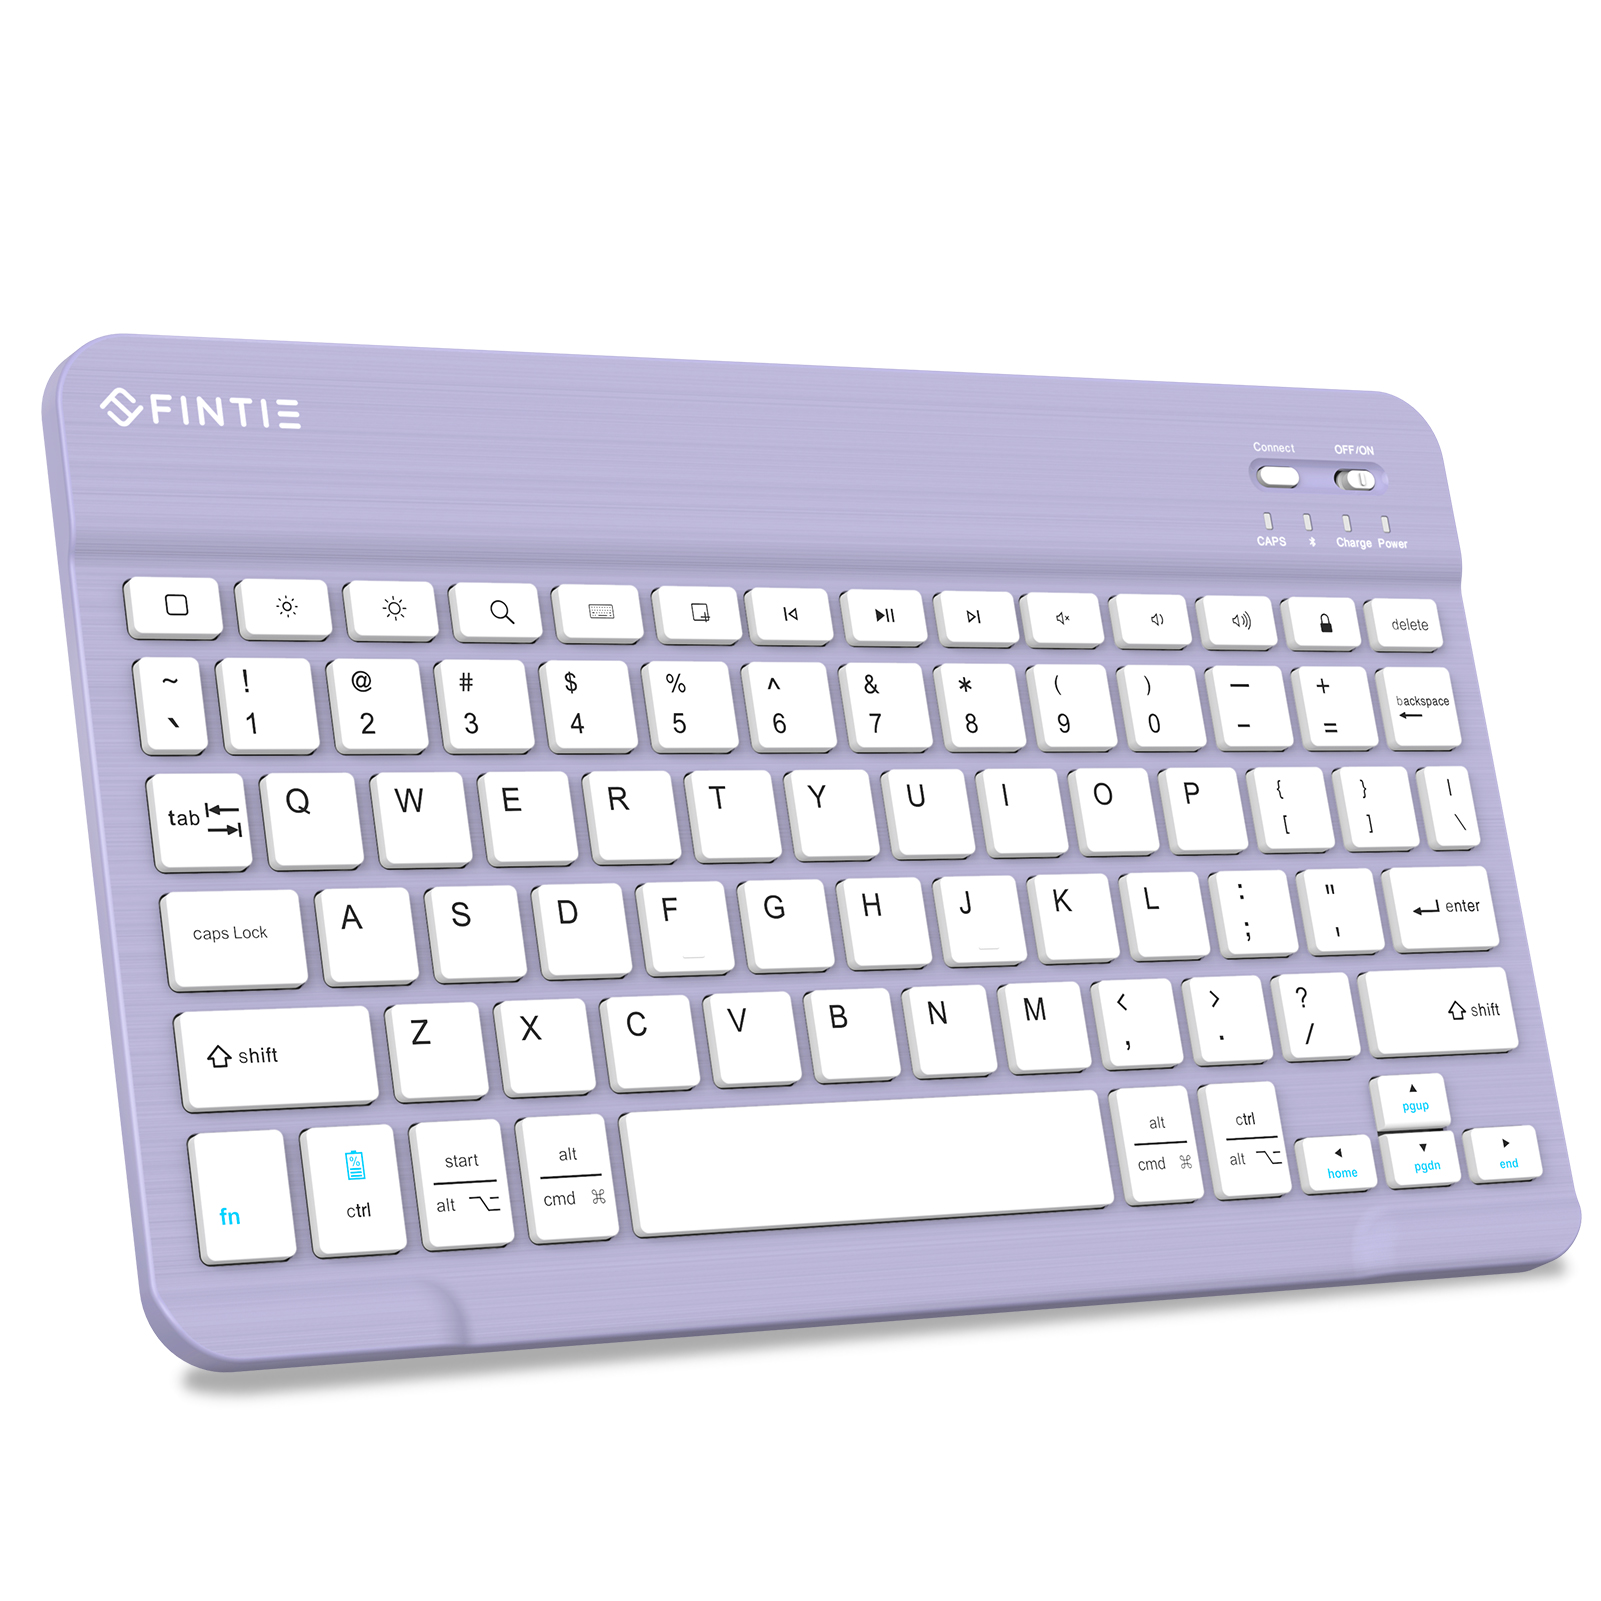 Fintie 10-Inch Ultrathin (4mm) Wireless Bluetooth Keyboard for iPad Samsung Tablet, iPhone Smartphone, iOS, Android Tablets Phone, Lavender - image 1 of 8